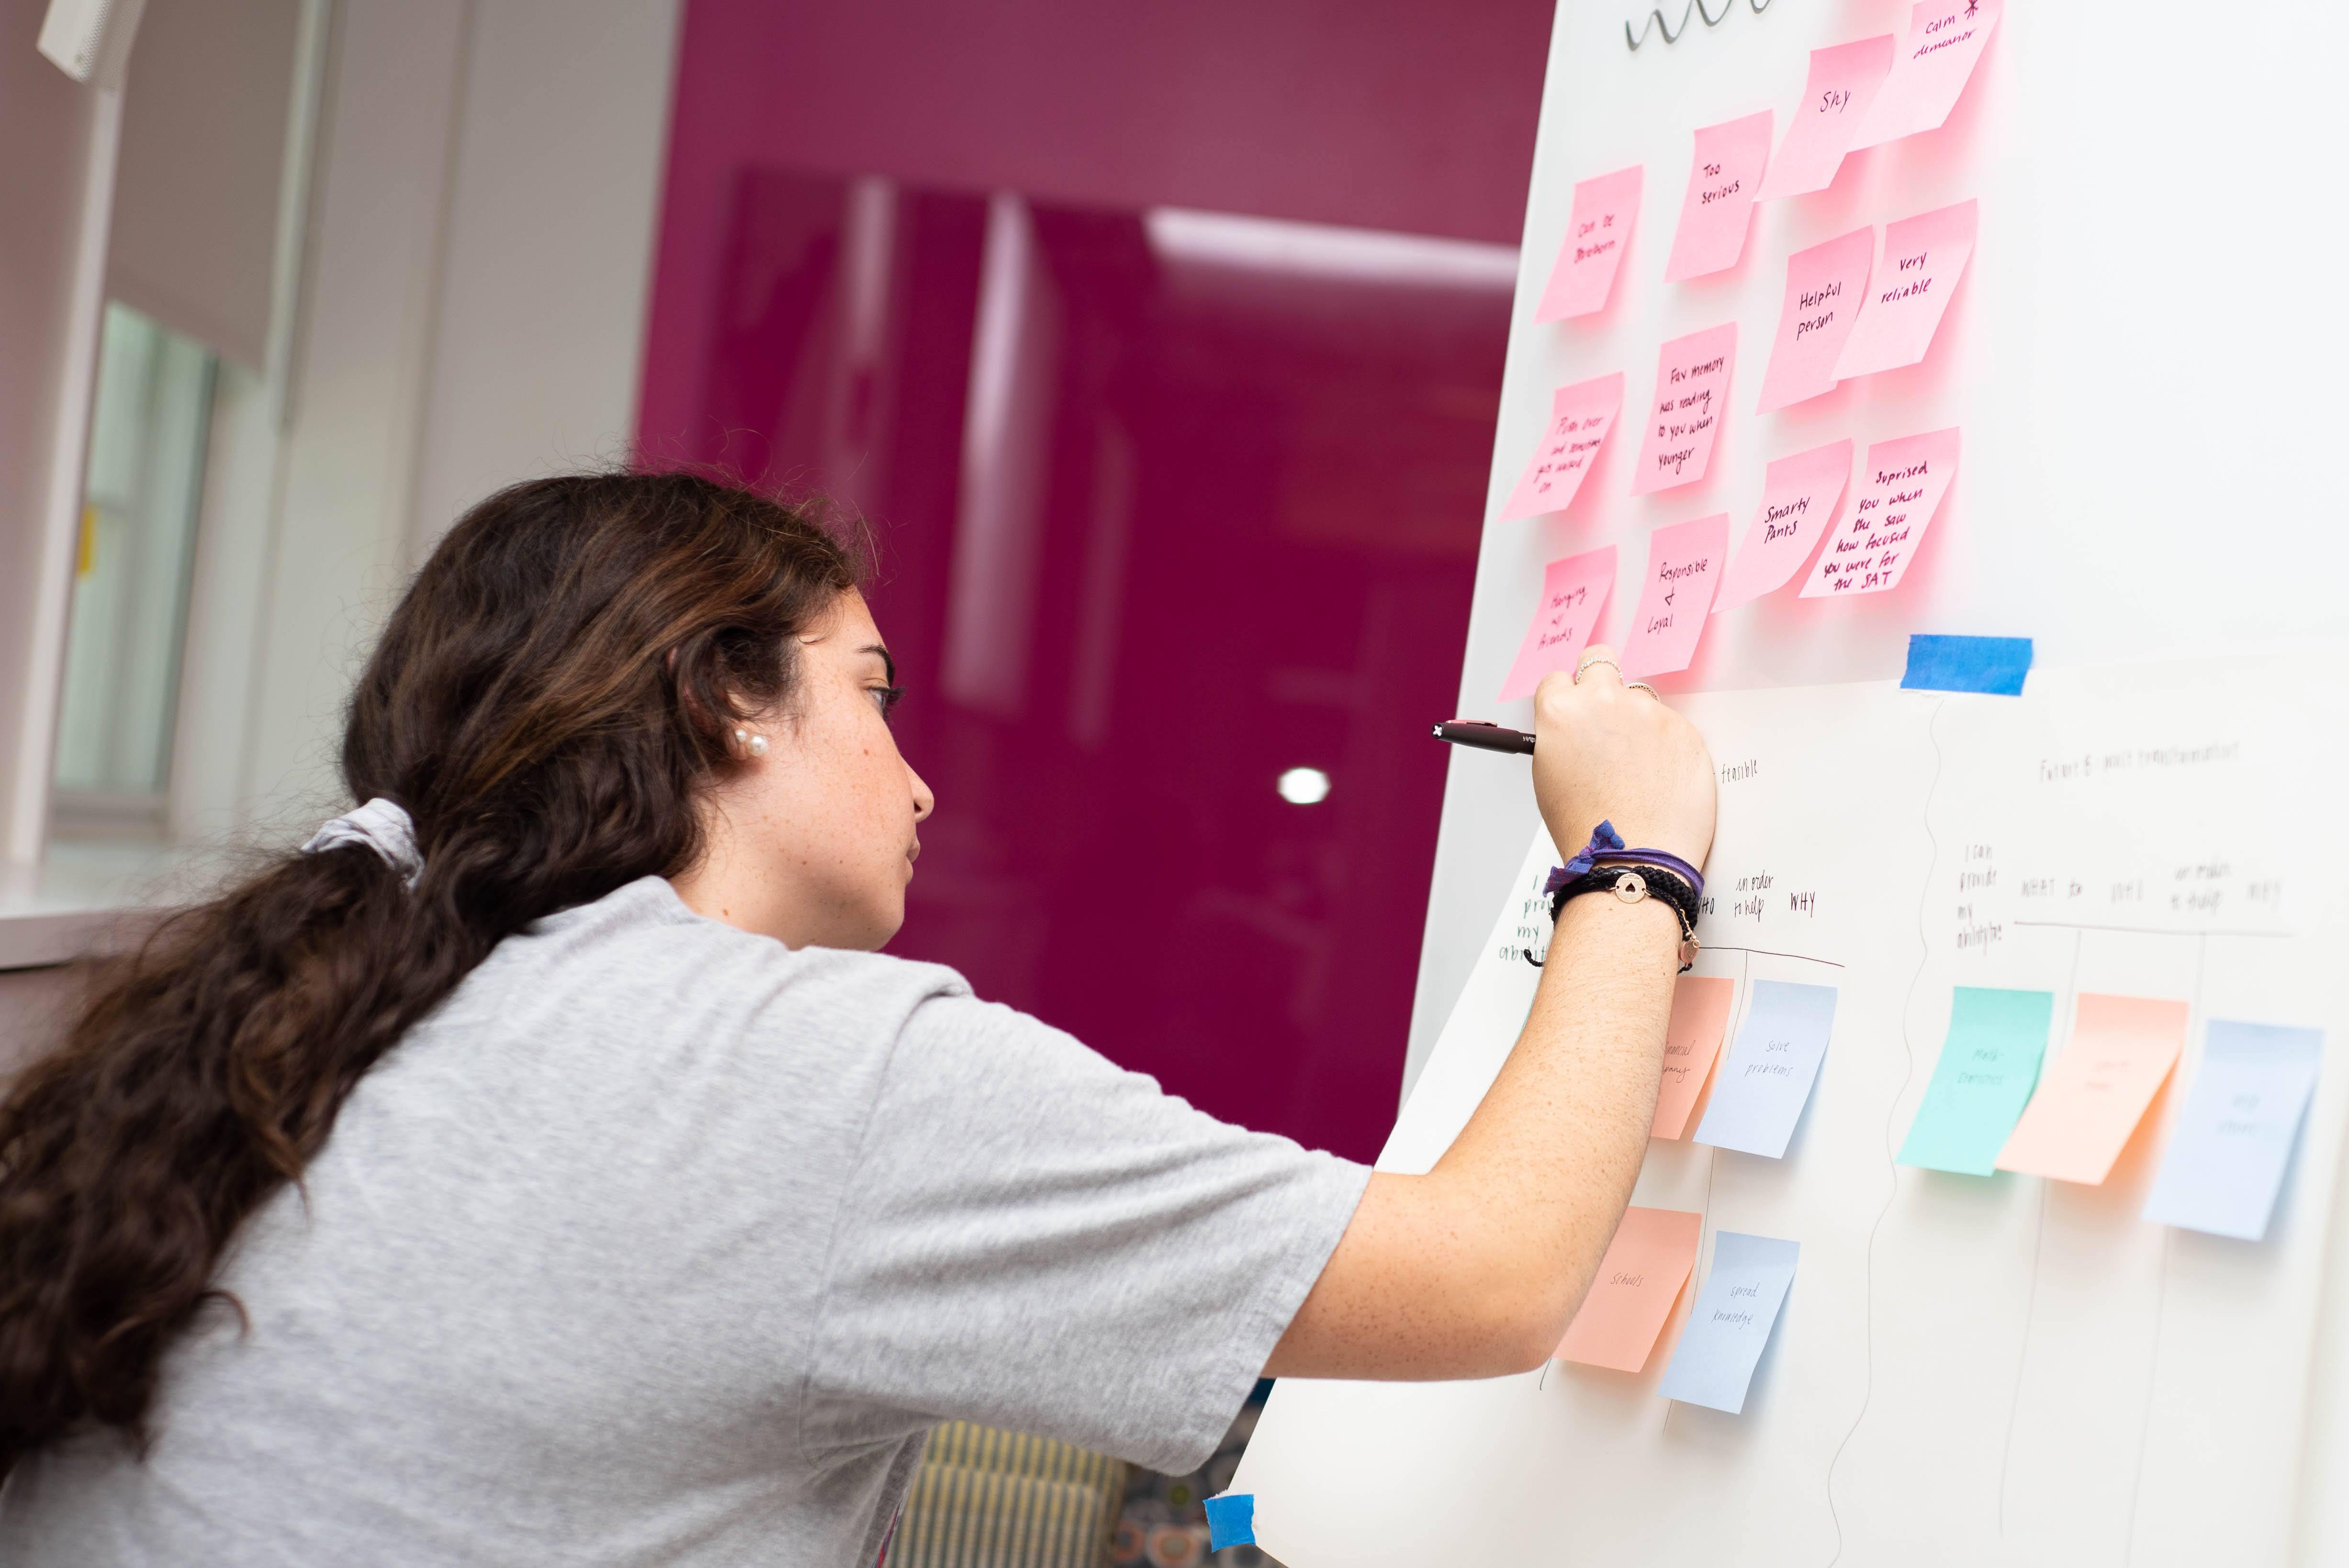 Student working on whiteboard that is covered in post-it notes